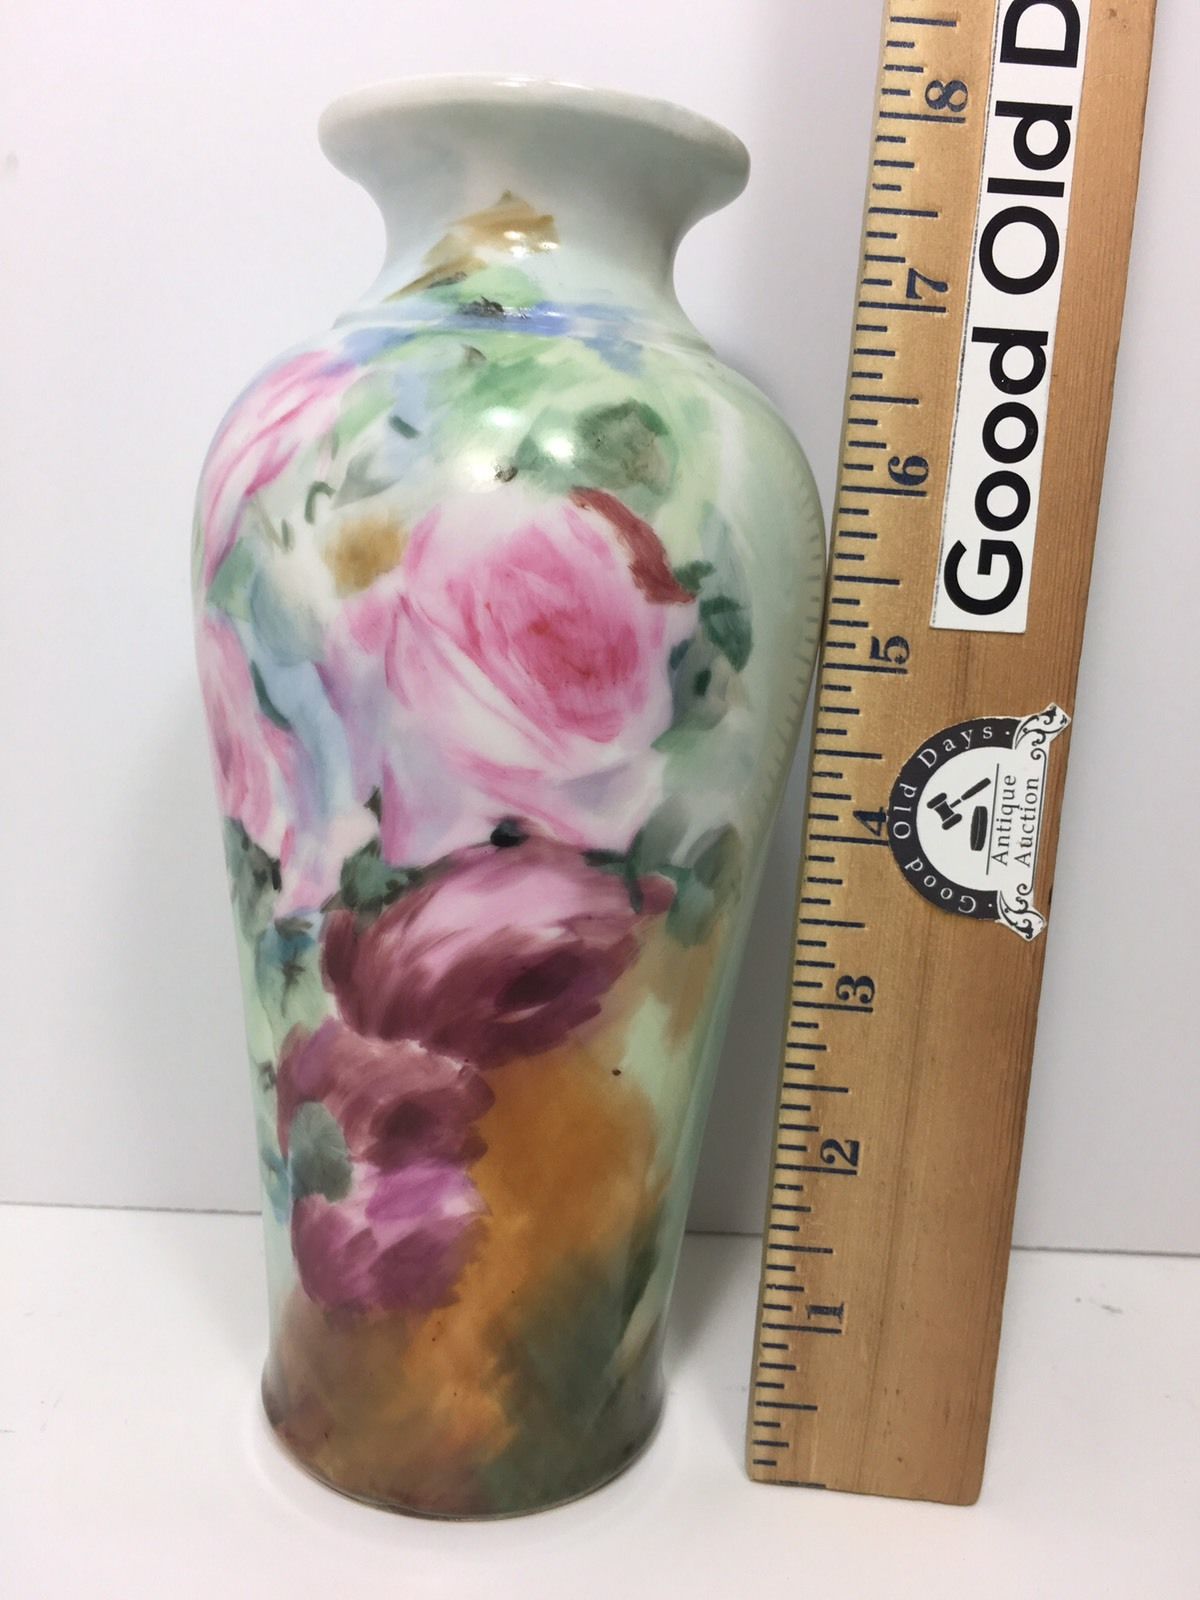 LIMOGES PORCELAIN  VASE  HAND PAINTED ROSES SIGNED AND DATED 1902